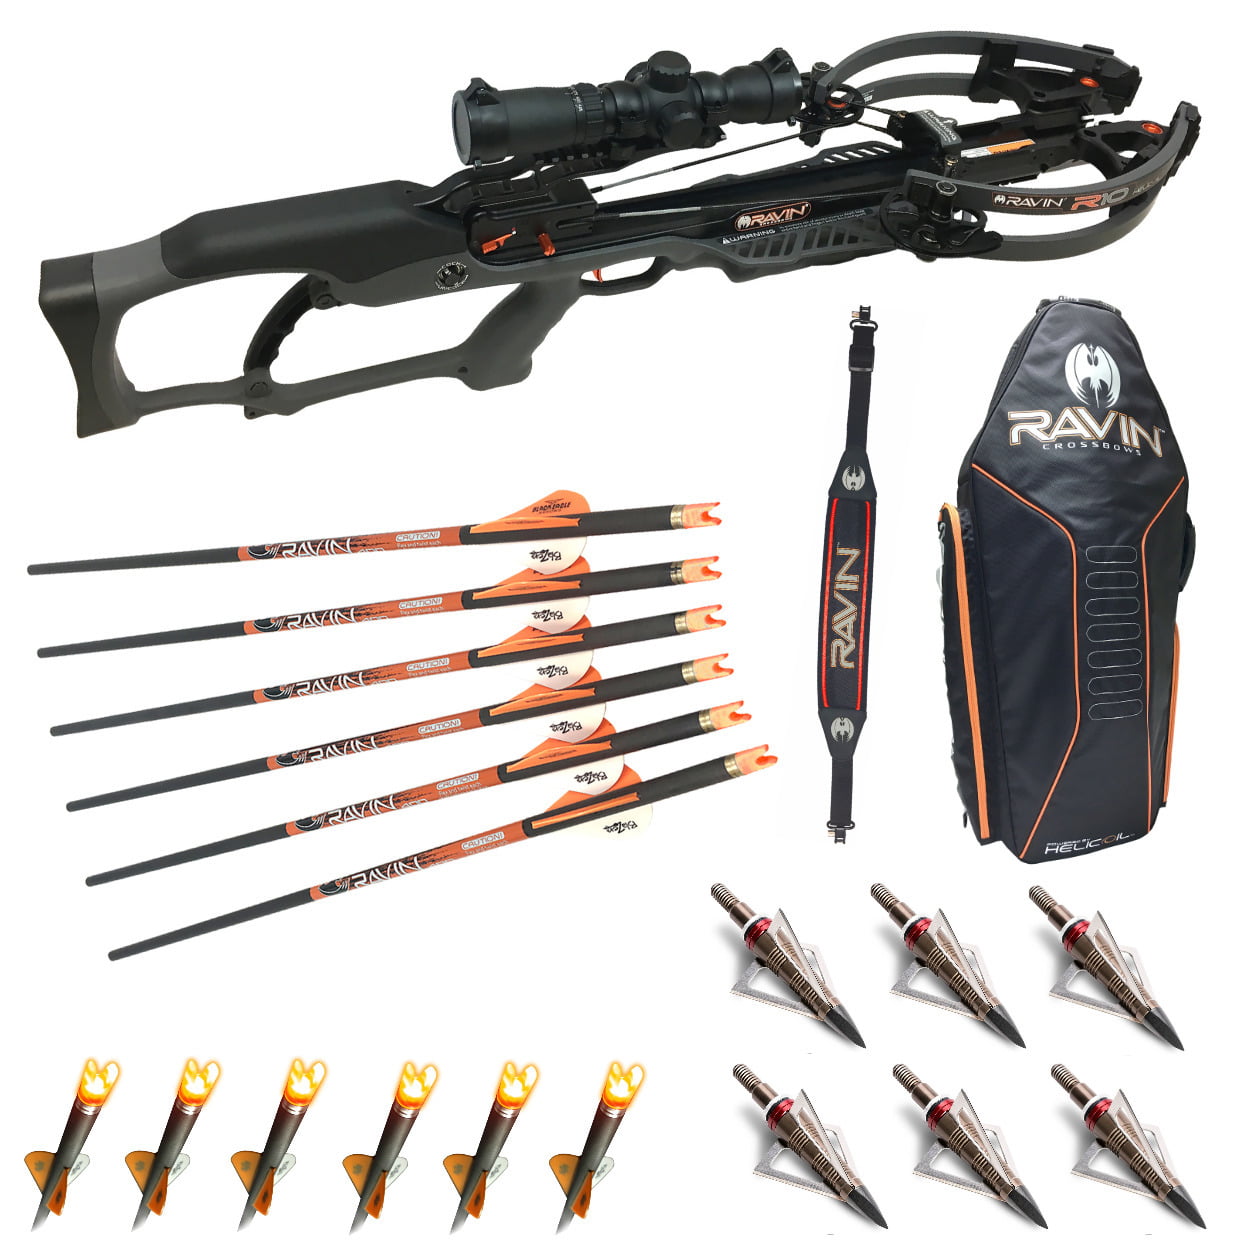 ravin-r10-crossbow-package-r011-with-soft-case-and-upgraded-arrows-kit